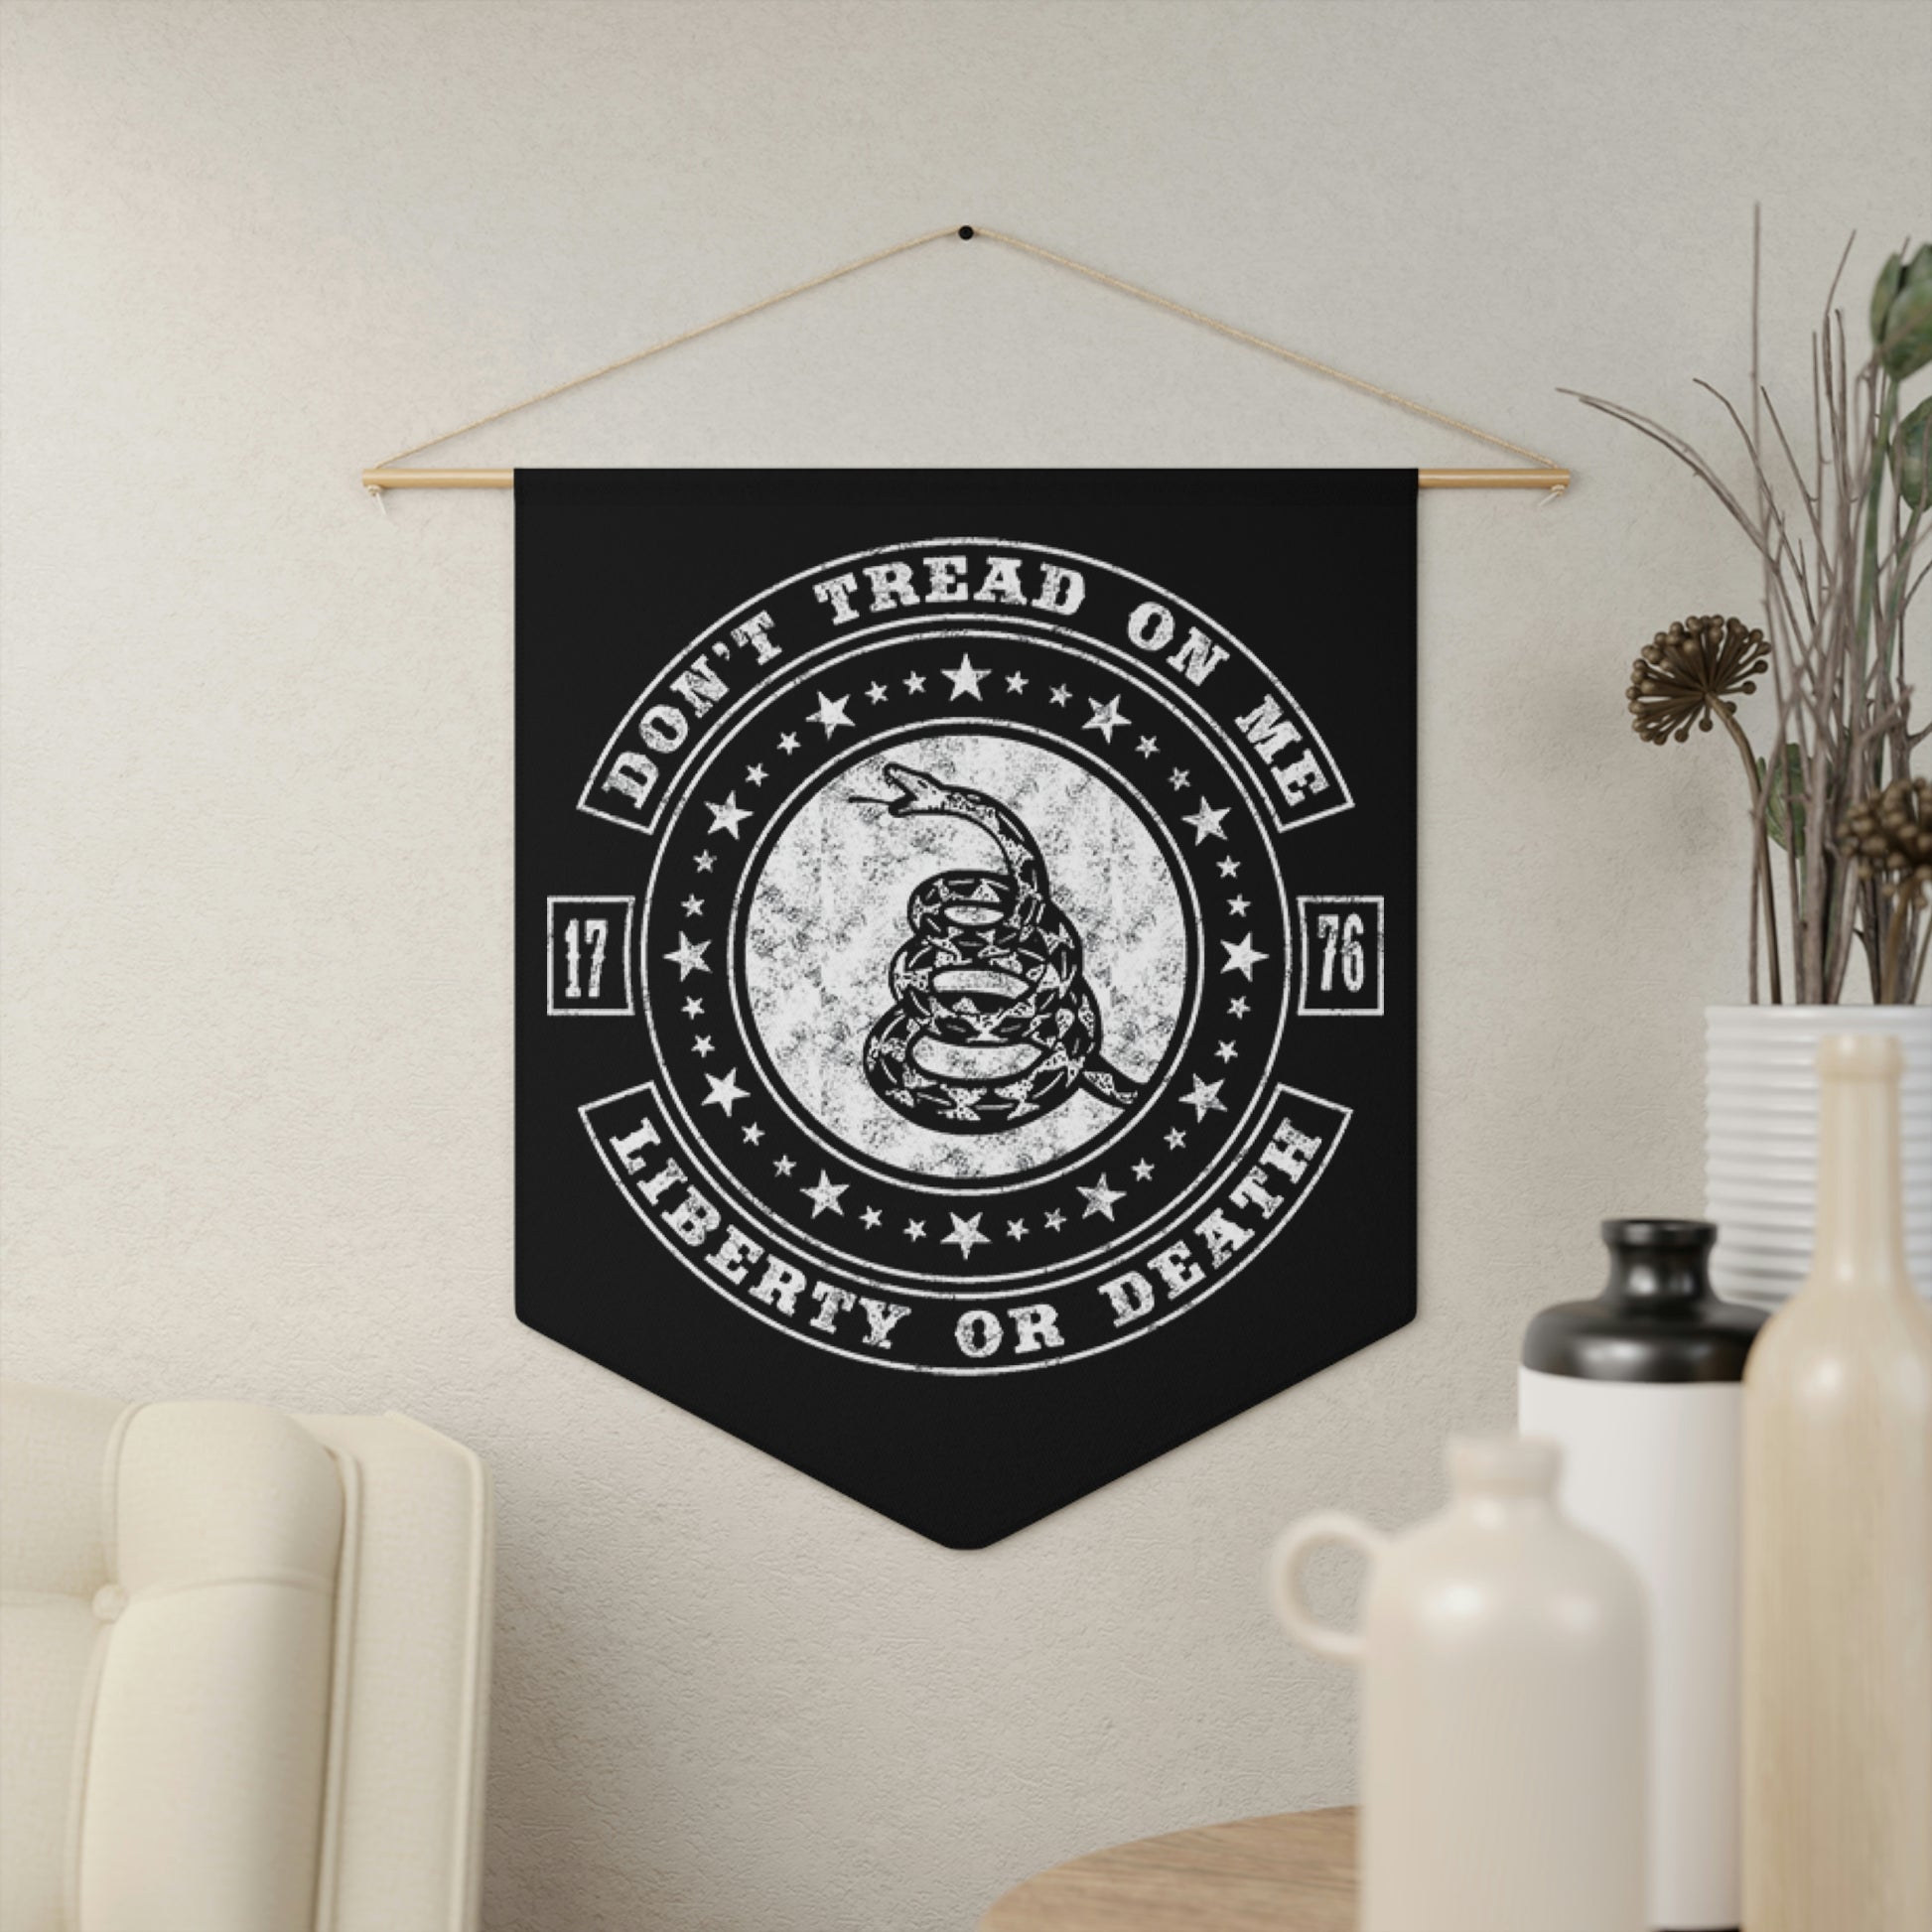 Don't Tread On Me Wall Pennant - Backwoods Branding Co.